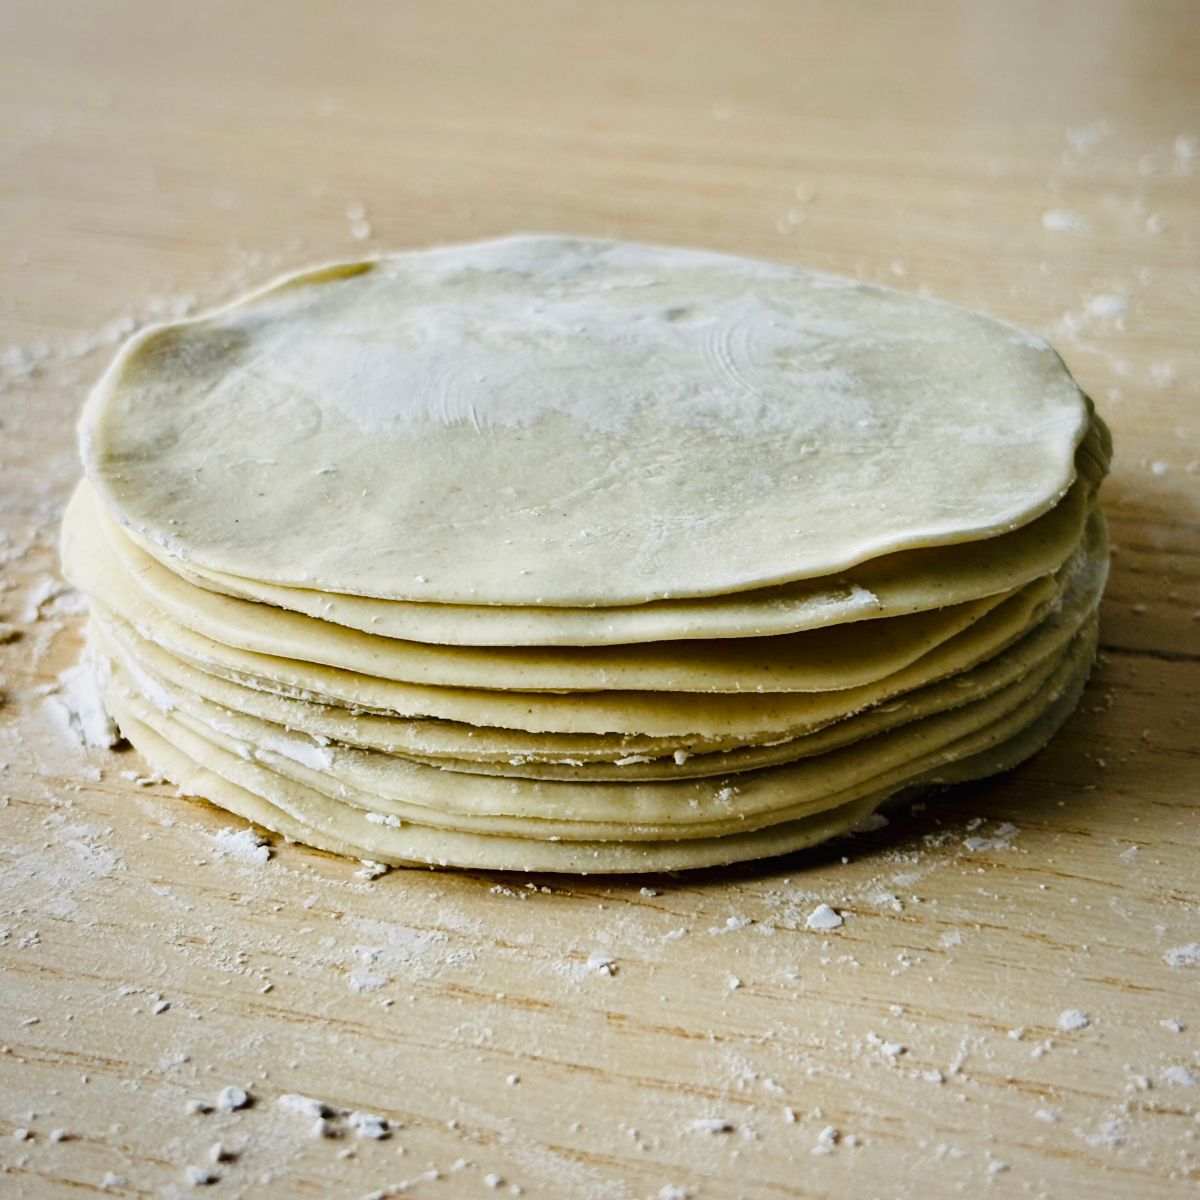 A stack of small flat rounds of dough, sat on a tabletop surface with a thin layer of white flour scattered around.